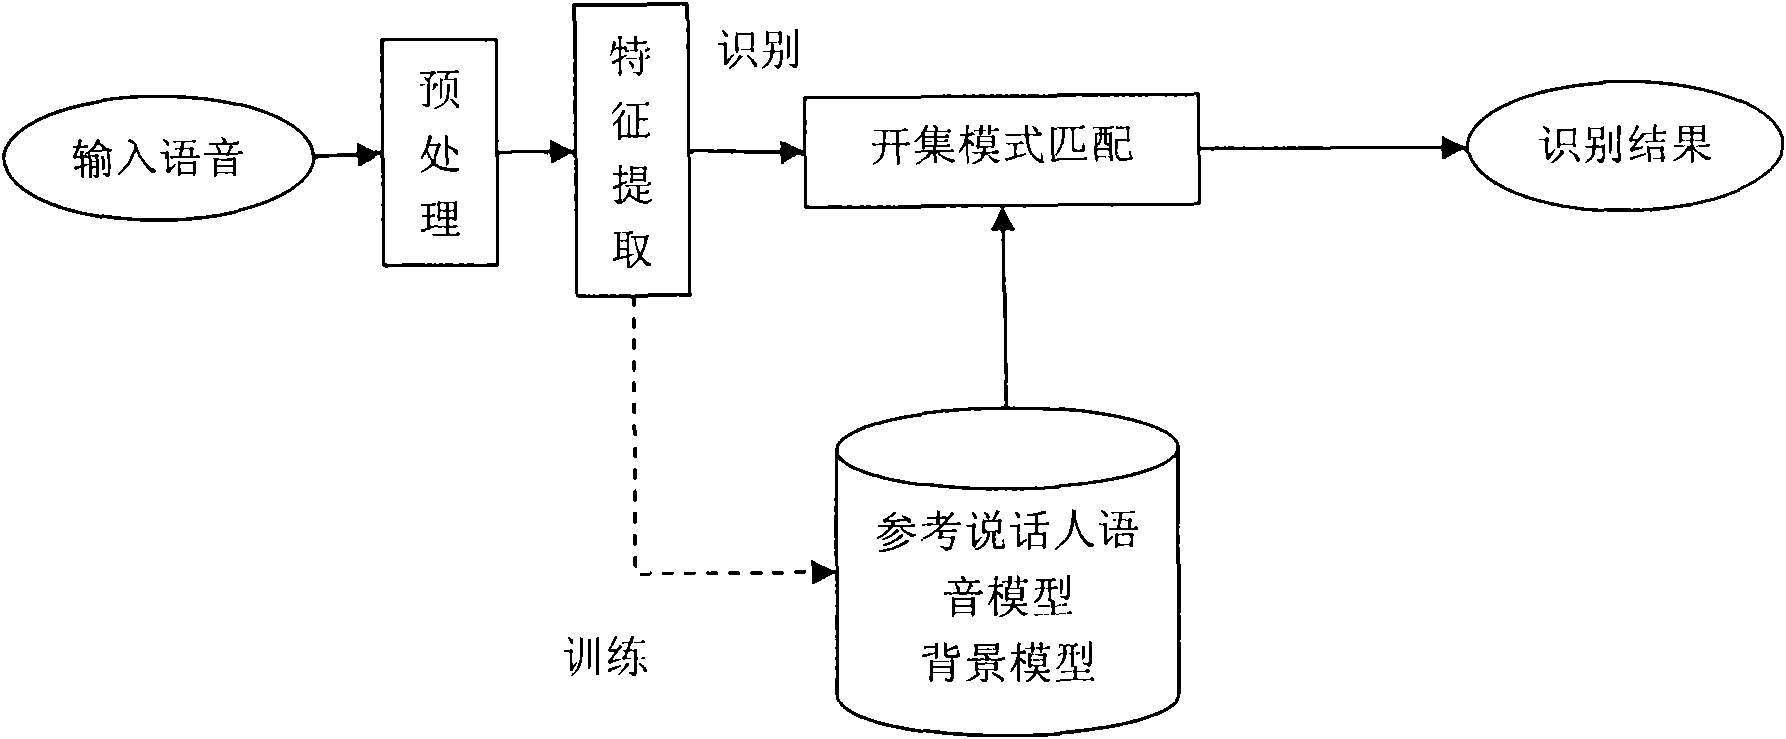 Embedded-based open set speaker recognition method and system thereof